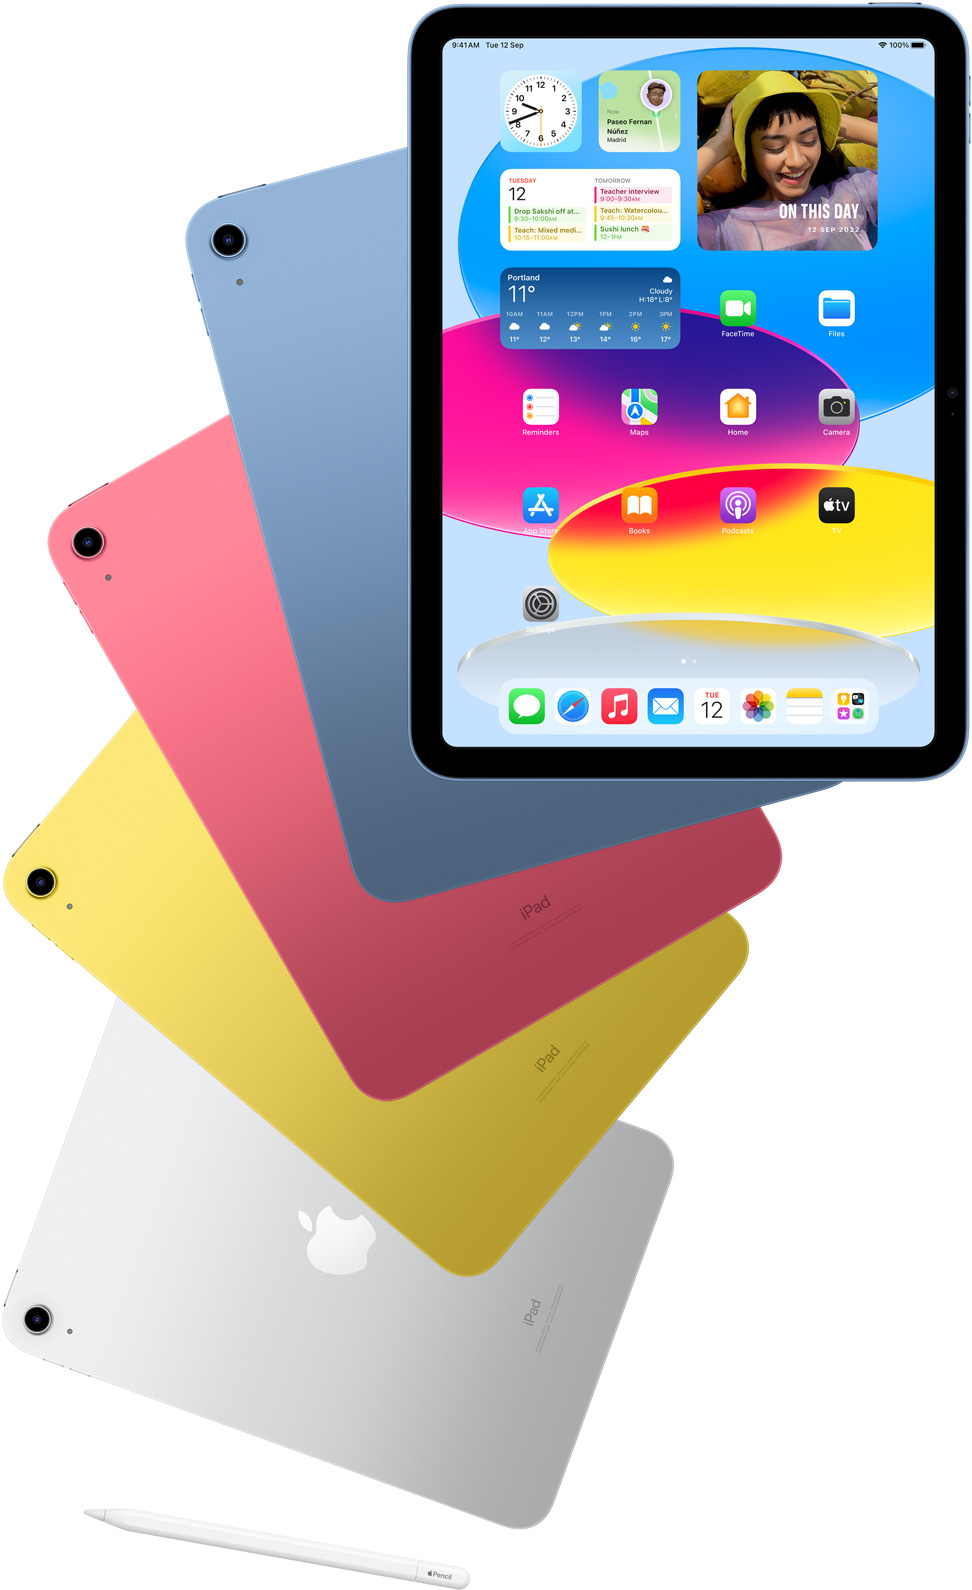 Front-view iPad shows the home screen with blue, pink, yellow and silver rear-facing iPads. An Apple Pencil sits near the arranged iPad models.